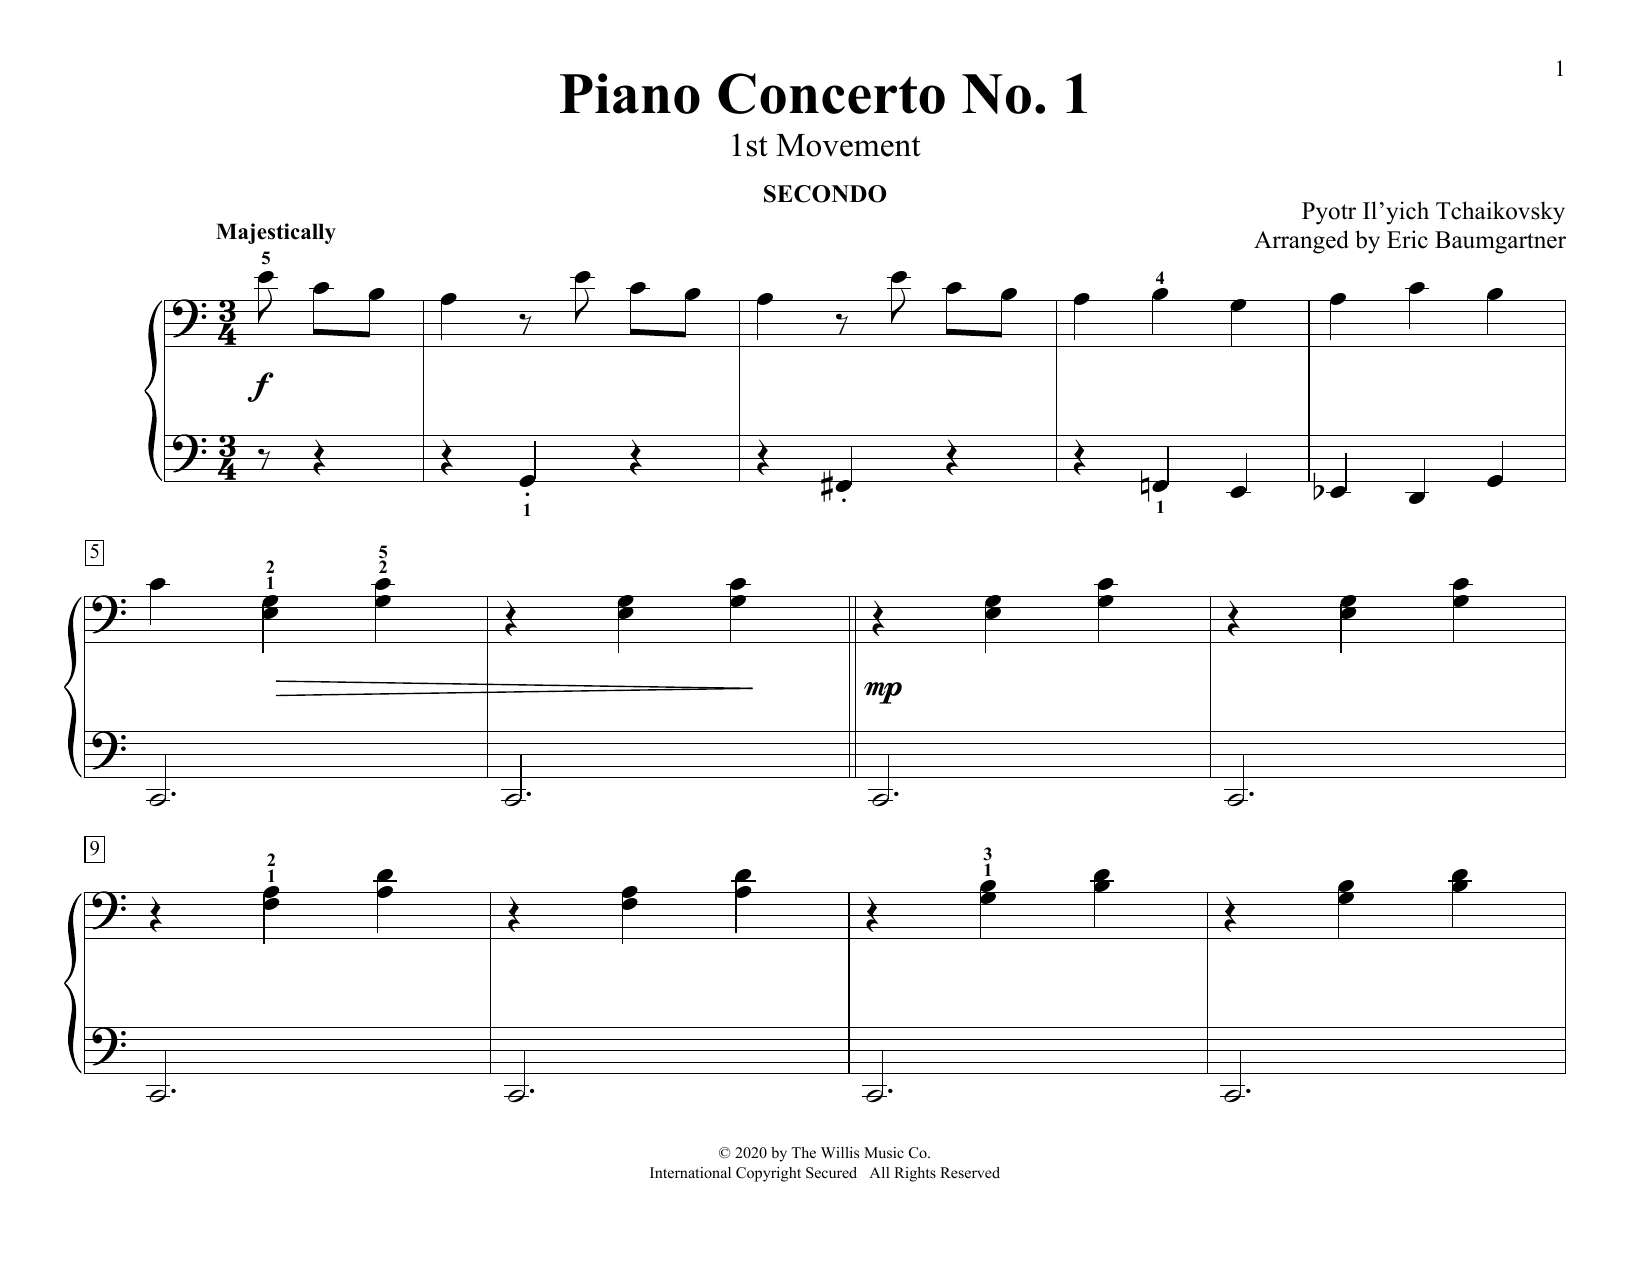 Download Pyotr Il'yich Tchaikovsky Piano Concerto No. 1 (1st Movement) (ar Sheet Music